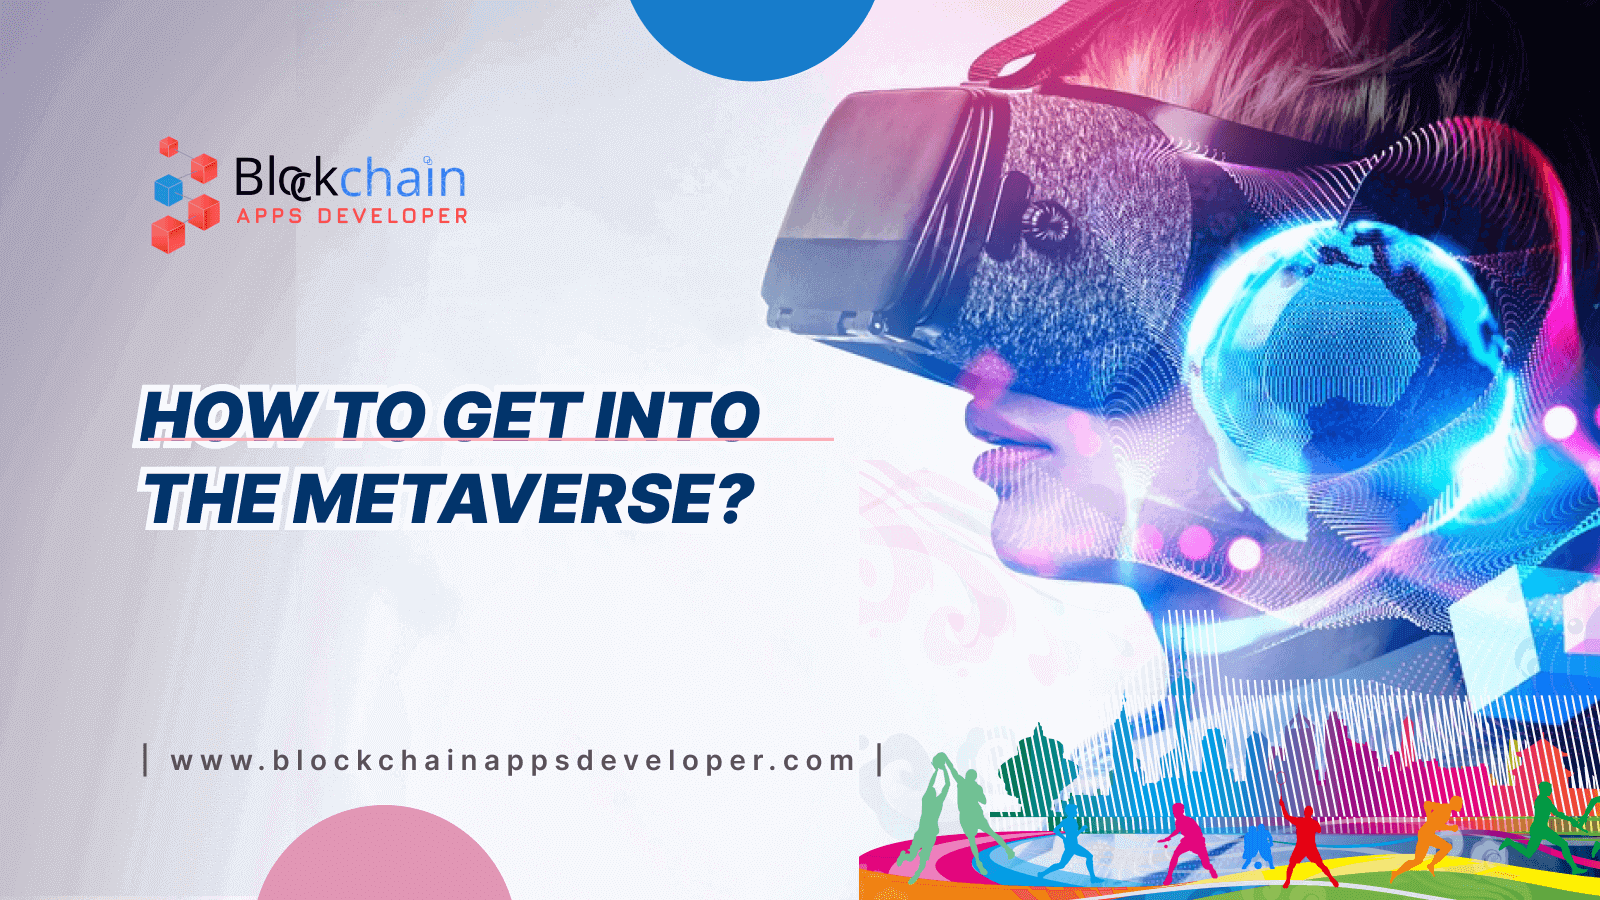 How to Enter and Access Metaverse: A Step-by-Step Guide